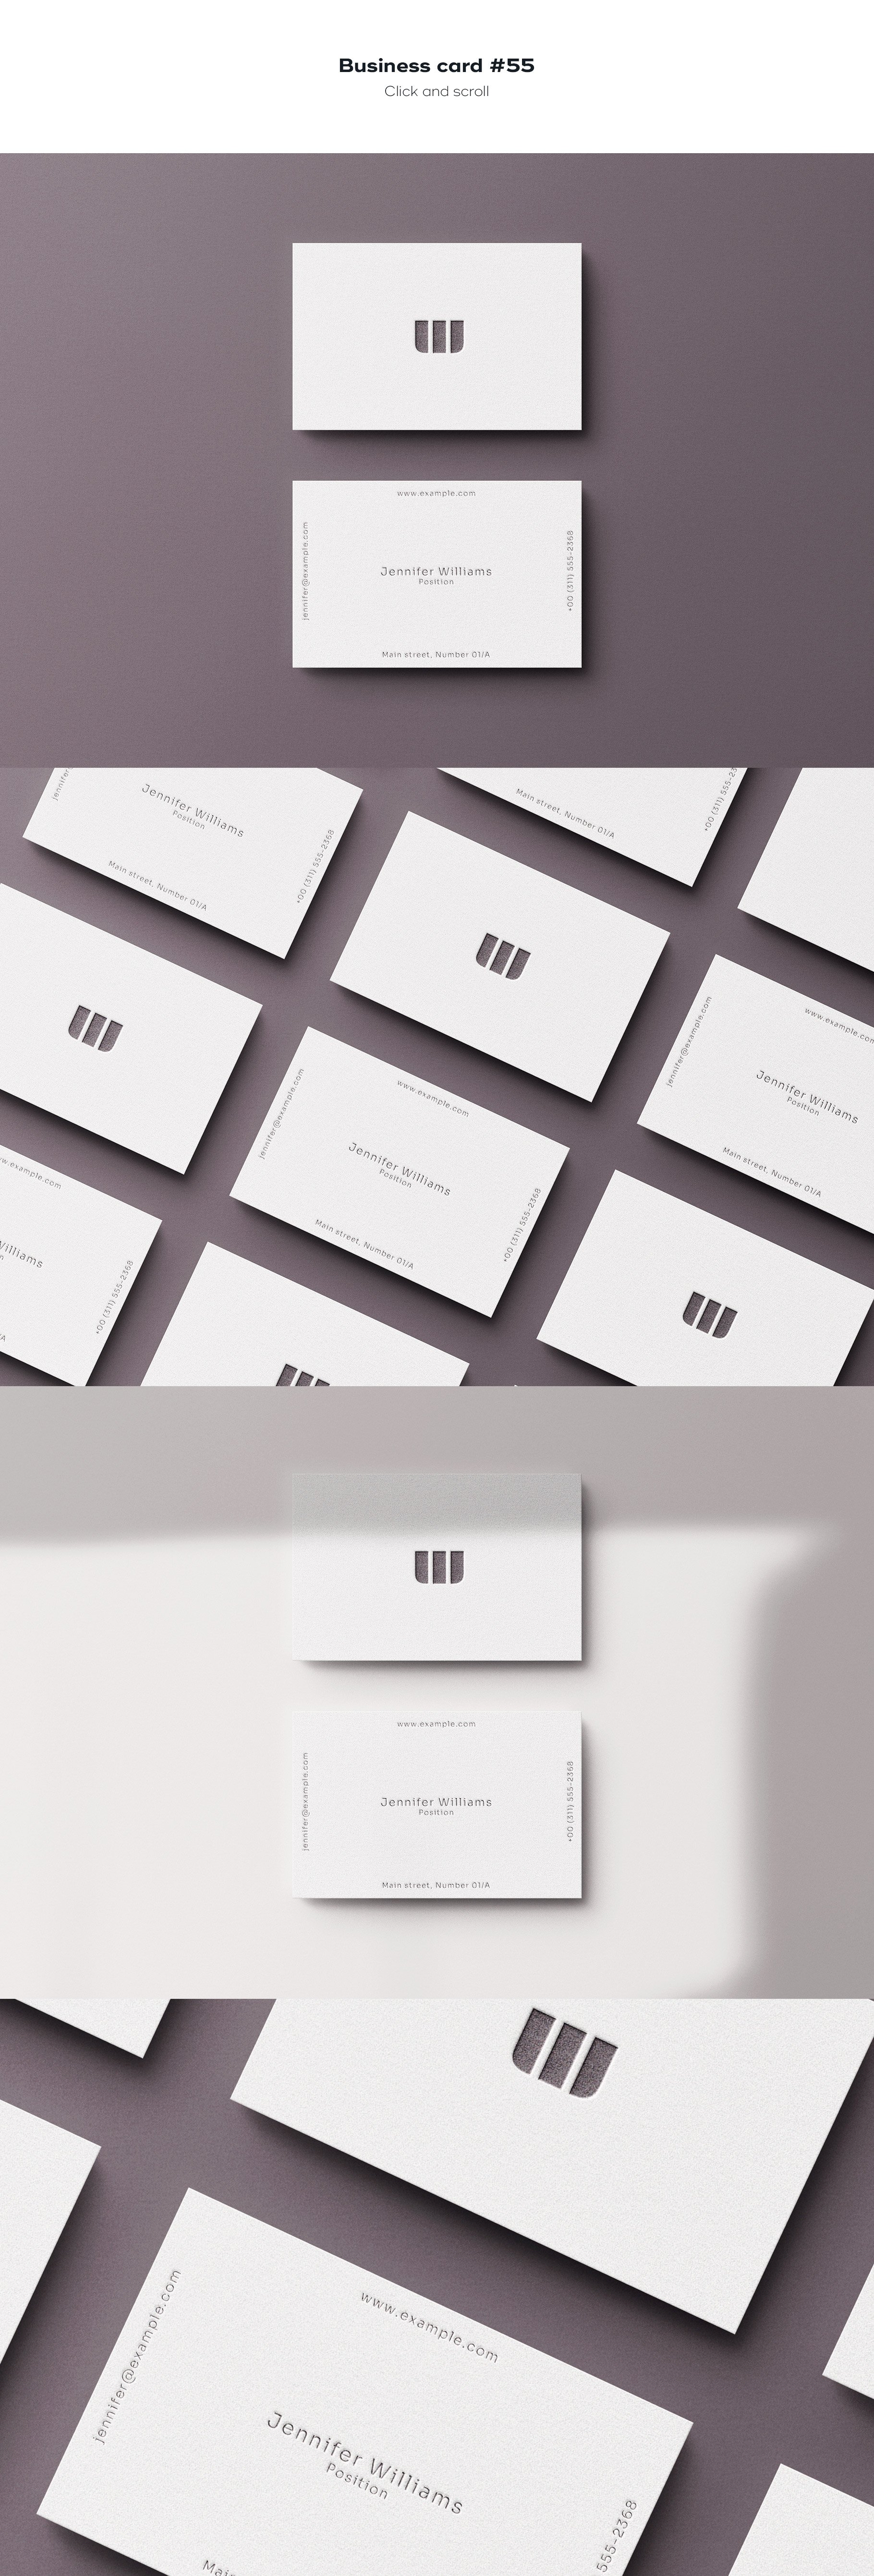 business card 55 493